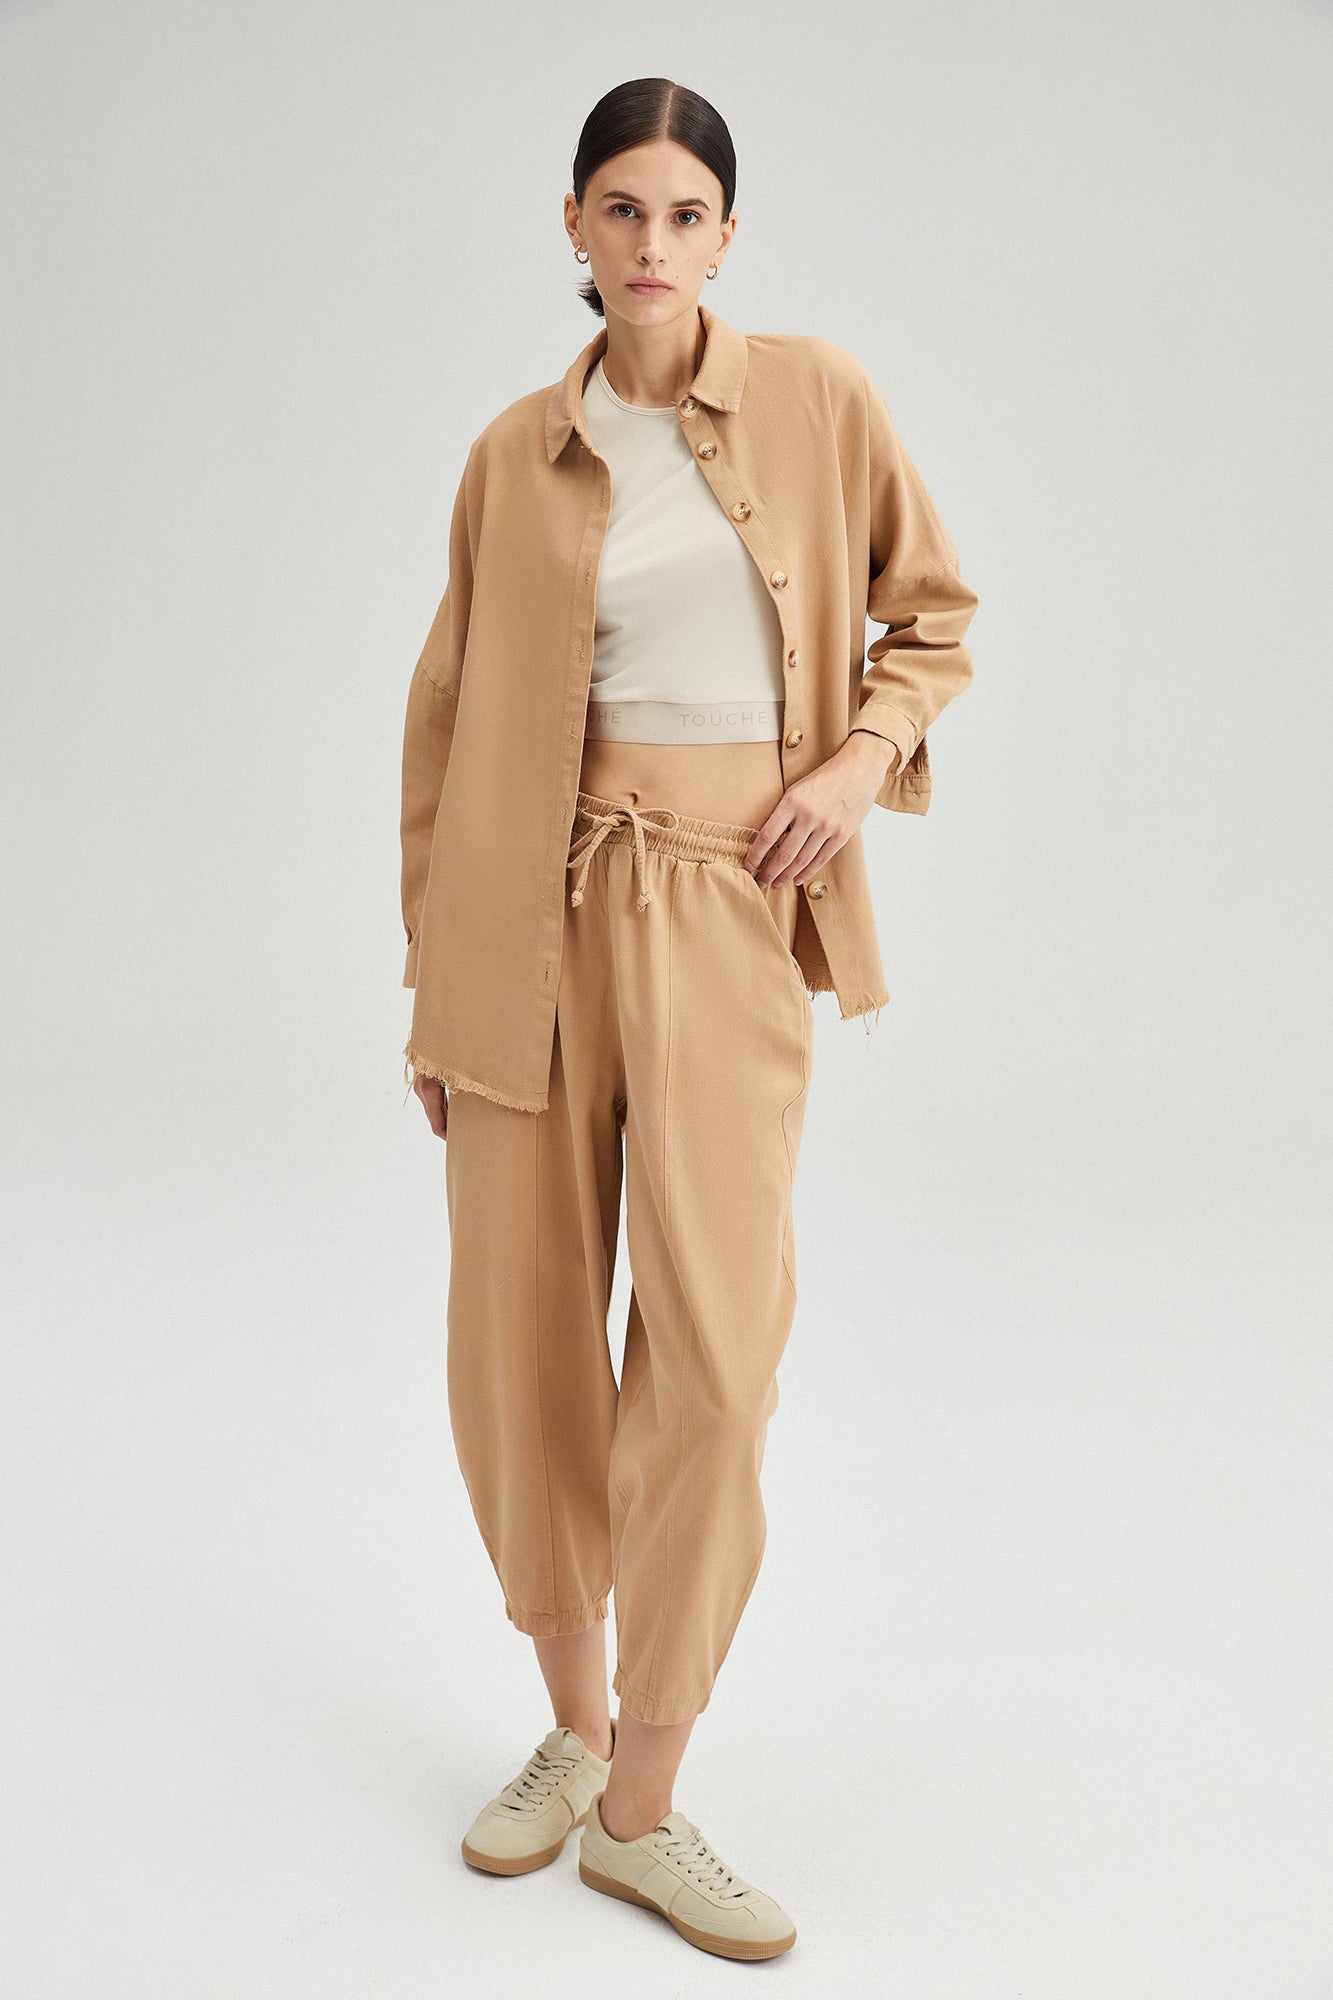 A model wears TOU11414 - Shirt Trousers Gabardine Set - Beige, wholesale Suit of Touche Prive to display at Lonca